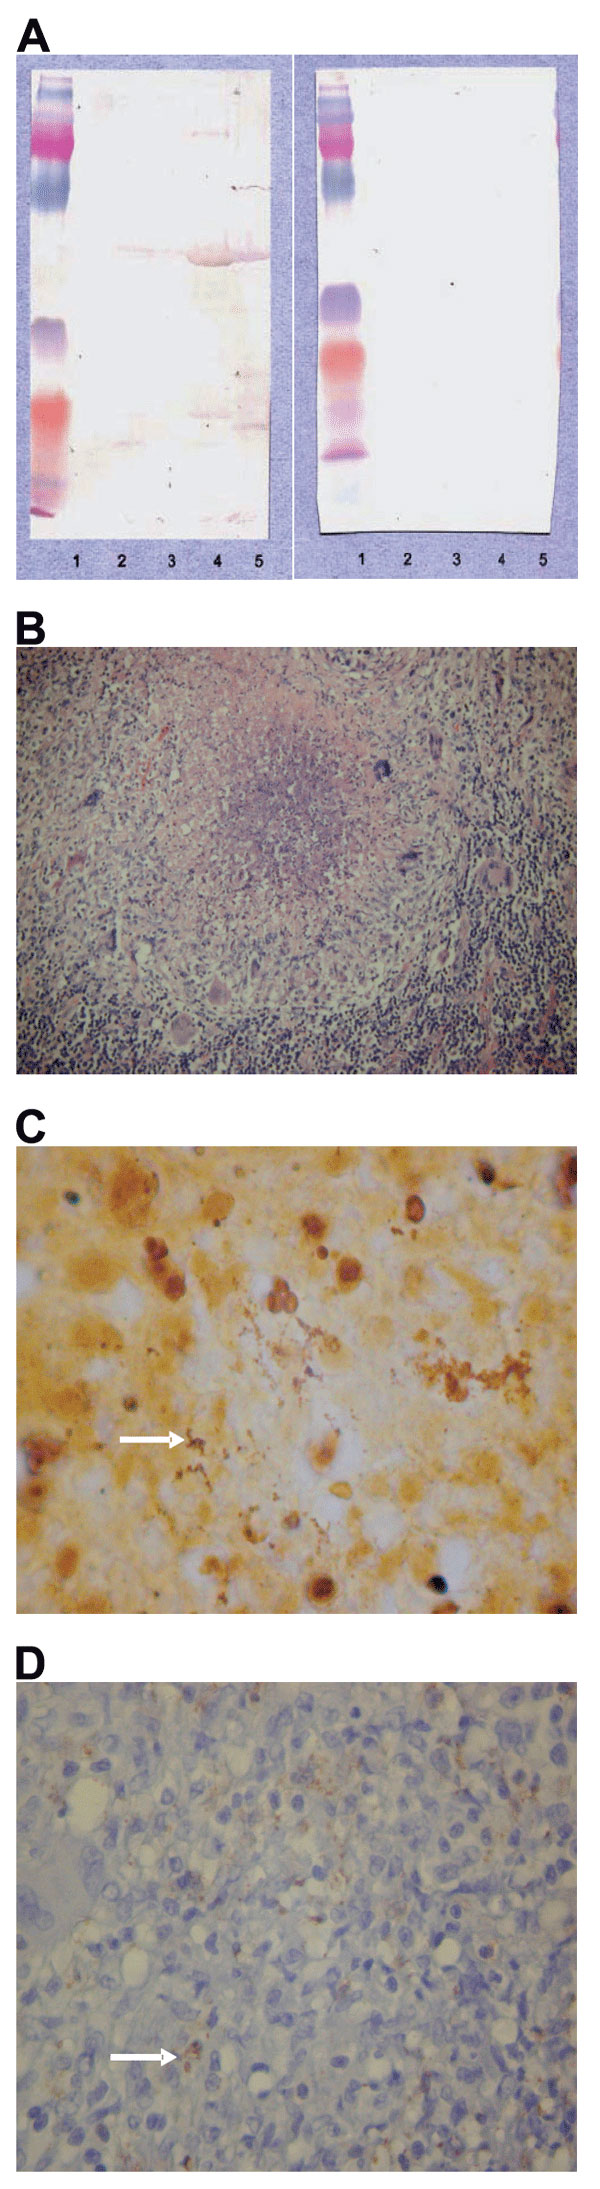 A) Western blotting analysis of lymph node specimen from the patient before 1) and after 2) cross-adsorption with Bartonella alsatica. Lane 1, B. quintana; lane 2, B. henselae; lane 3, B. elizabethae; lane 4, B. vinsonii subsp. berkhoffii; lane 5, B. alsatica. B) Characteristic histologic change in the lymph node with B. alsatica infection. Shown is an inflammatory granulomatous process with central microabscess surrounded by a ring of macrophages and rare giant cells (hematoxylin and eosin stain, original magnification x100). C) Bacteria (arrow) in an abscess formation mixed with necrotic debris (Warthin-Starry silver stain, original magnification x1,000). D) Immunohistochemical detection of B. alsatica (arrow) in lymph node pulp with an extracellular distribution (polyclonal antibody and hematoxylin counterstain, original magnification x400).